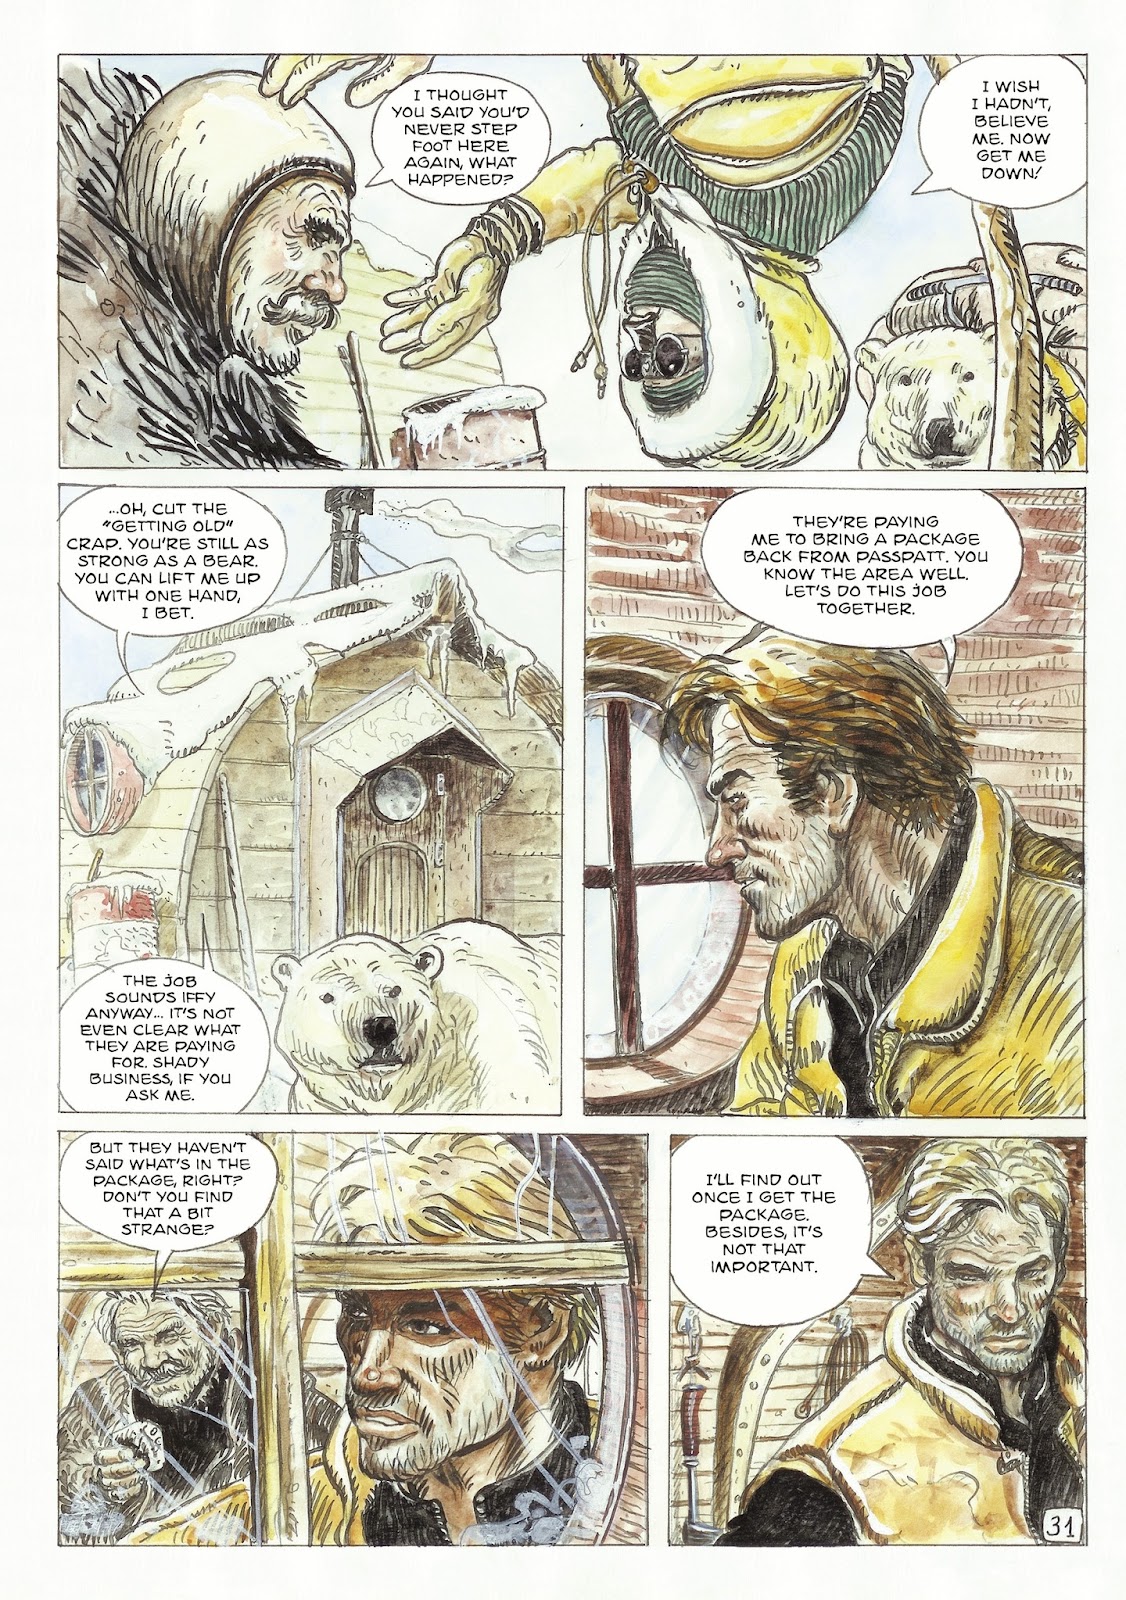 The Man With the Bear issue 1 - Page 33